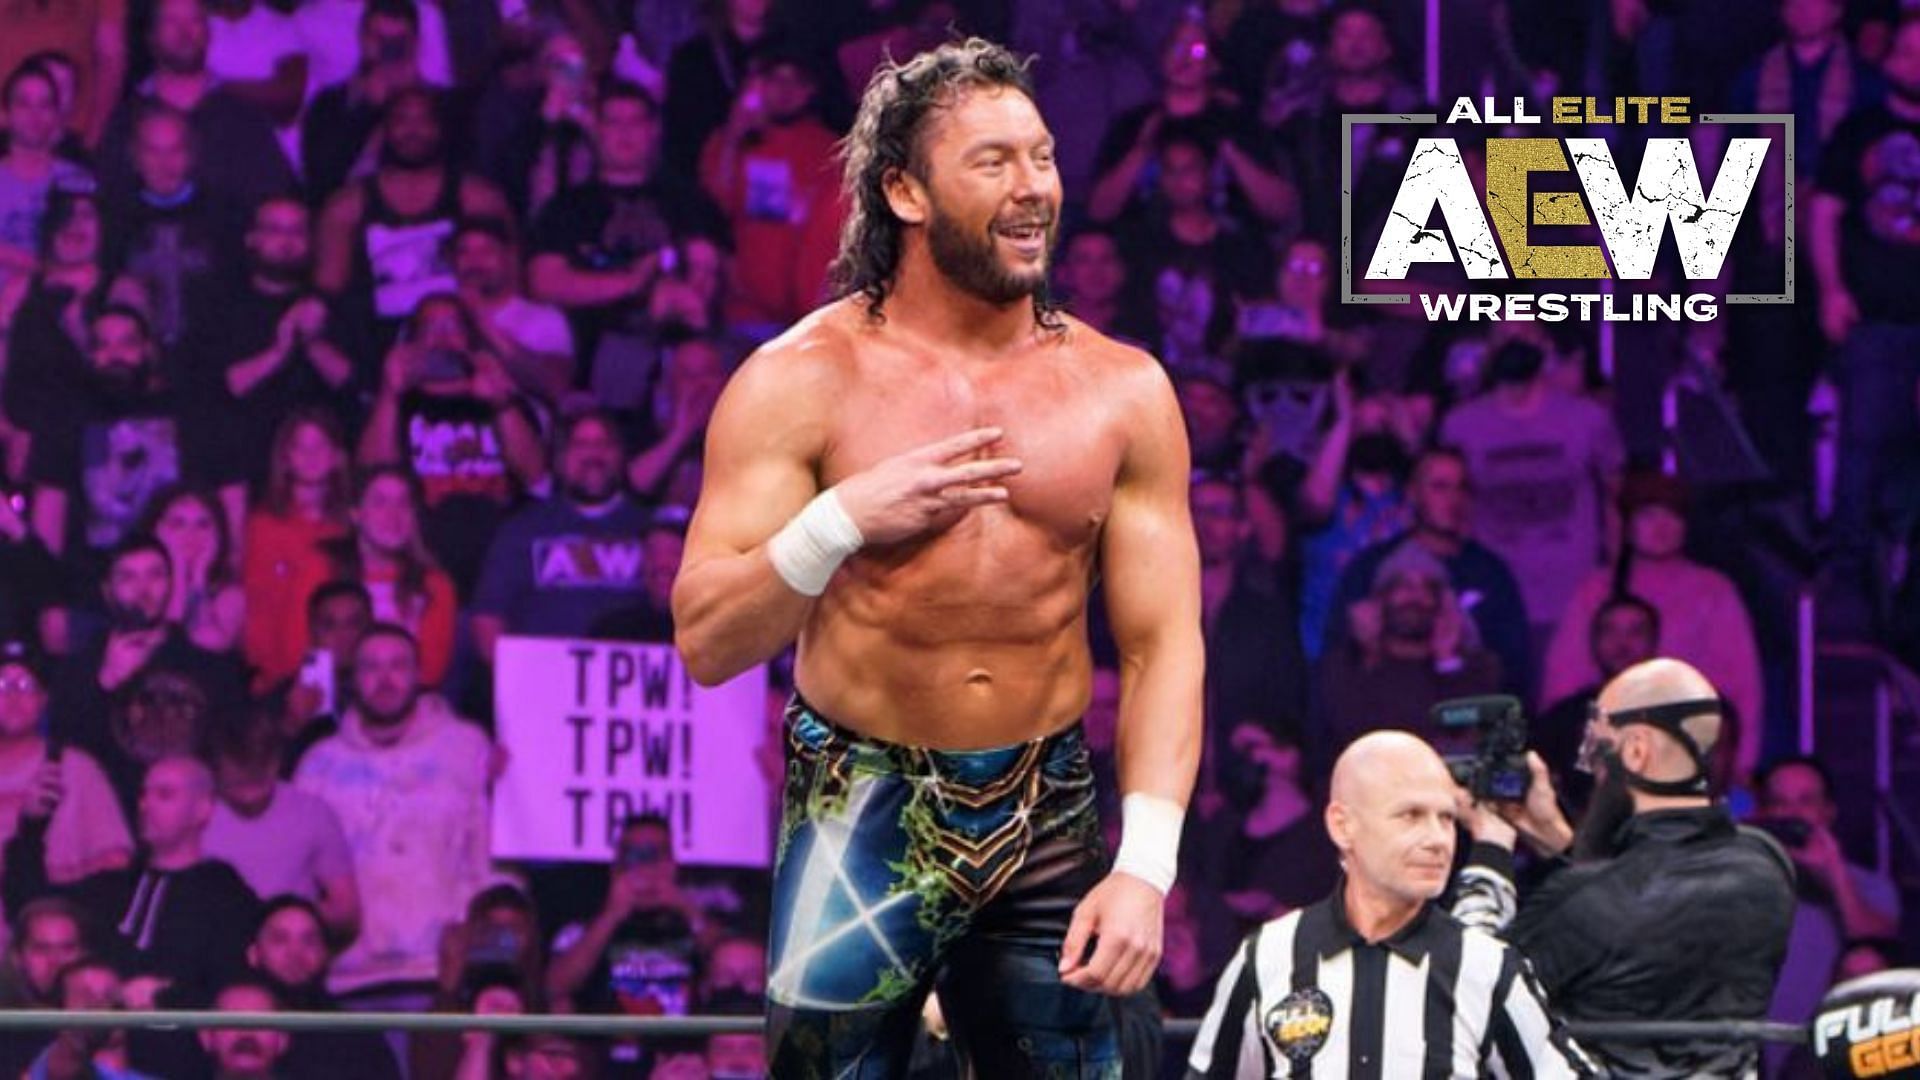 What does Kenny Omega have planned for 2023?